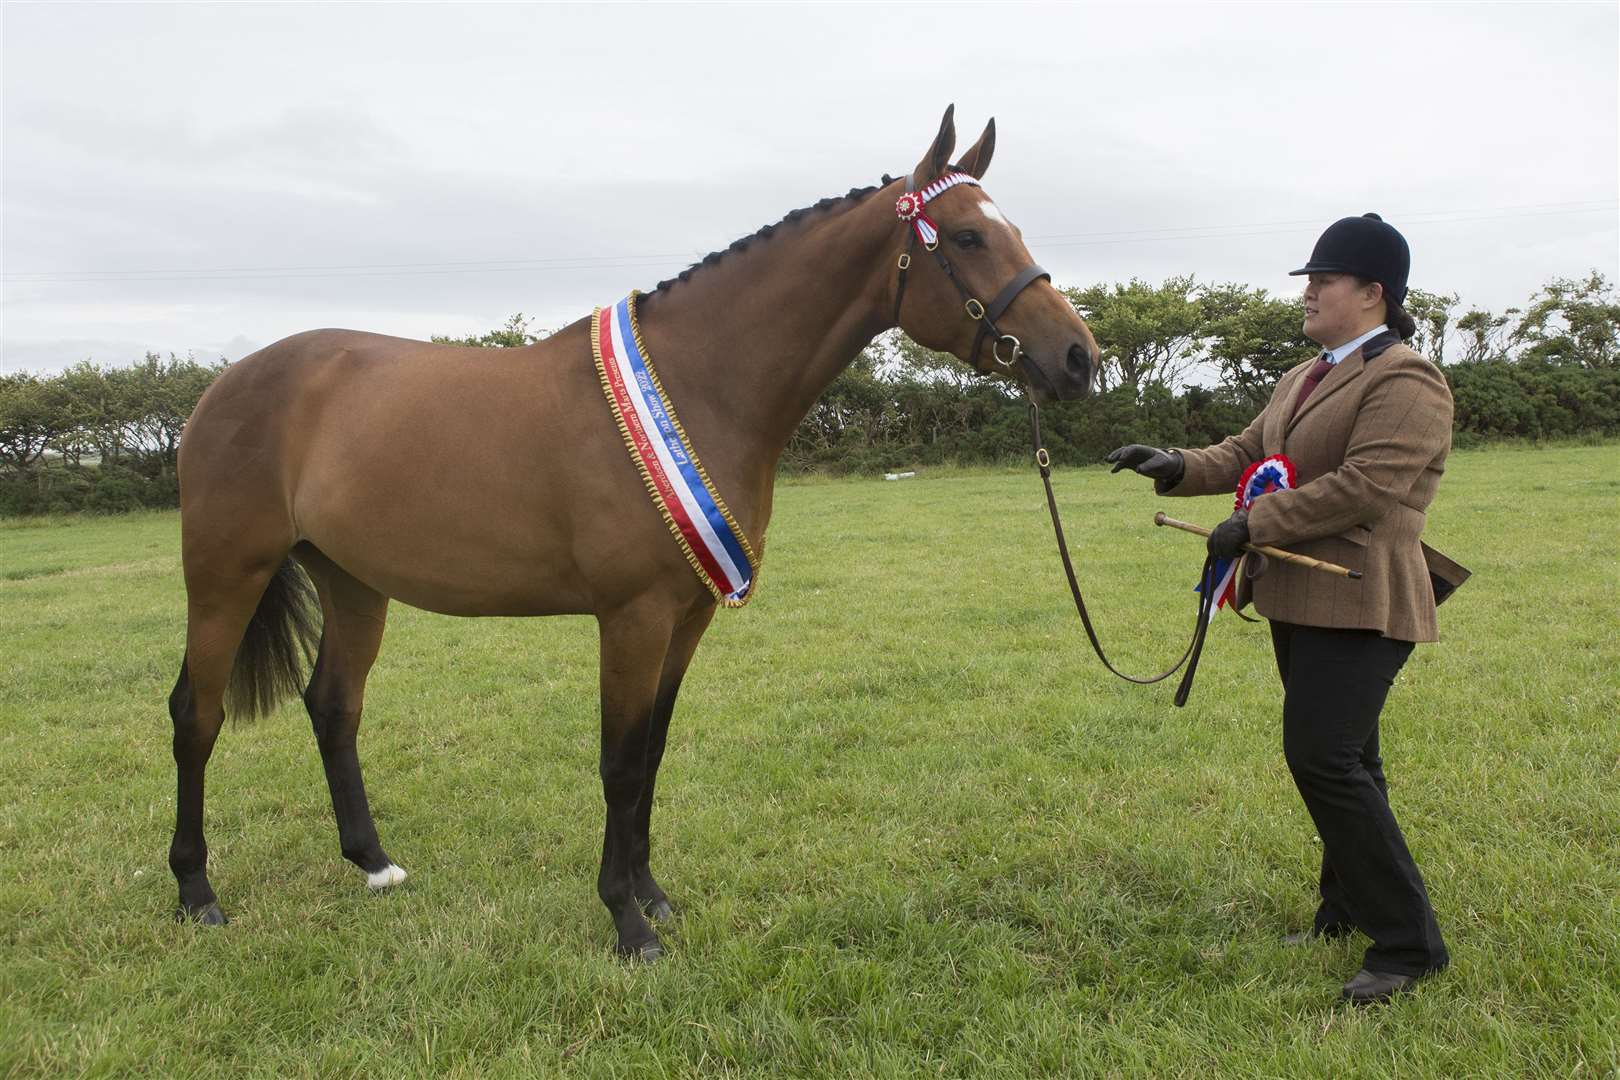 Kimmy Lai, Dempster Street, Wick, took the supreme horse championship and the champion of champions trophy with her light legged champion, Ashlea's Hollywood Showgirl, a three year old by Hollywood. Picture: Robert MacDonald/Northern Studios